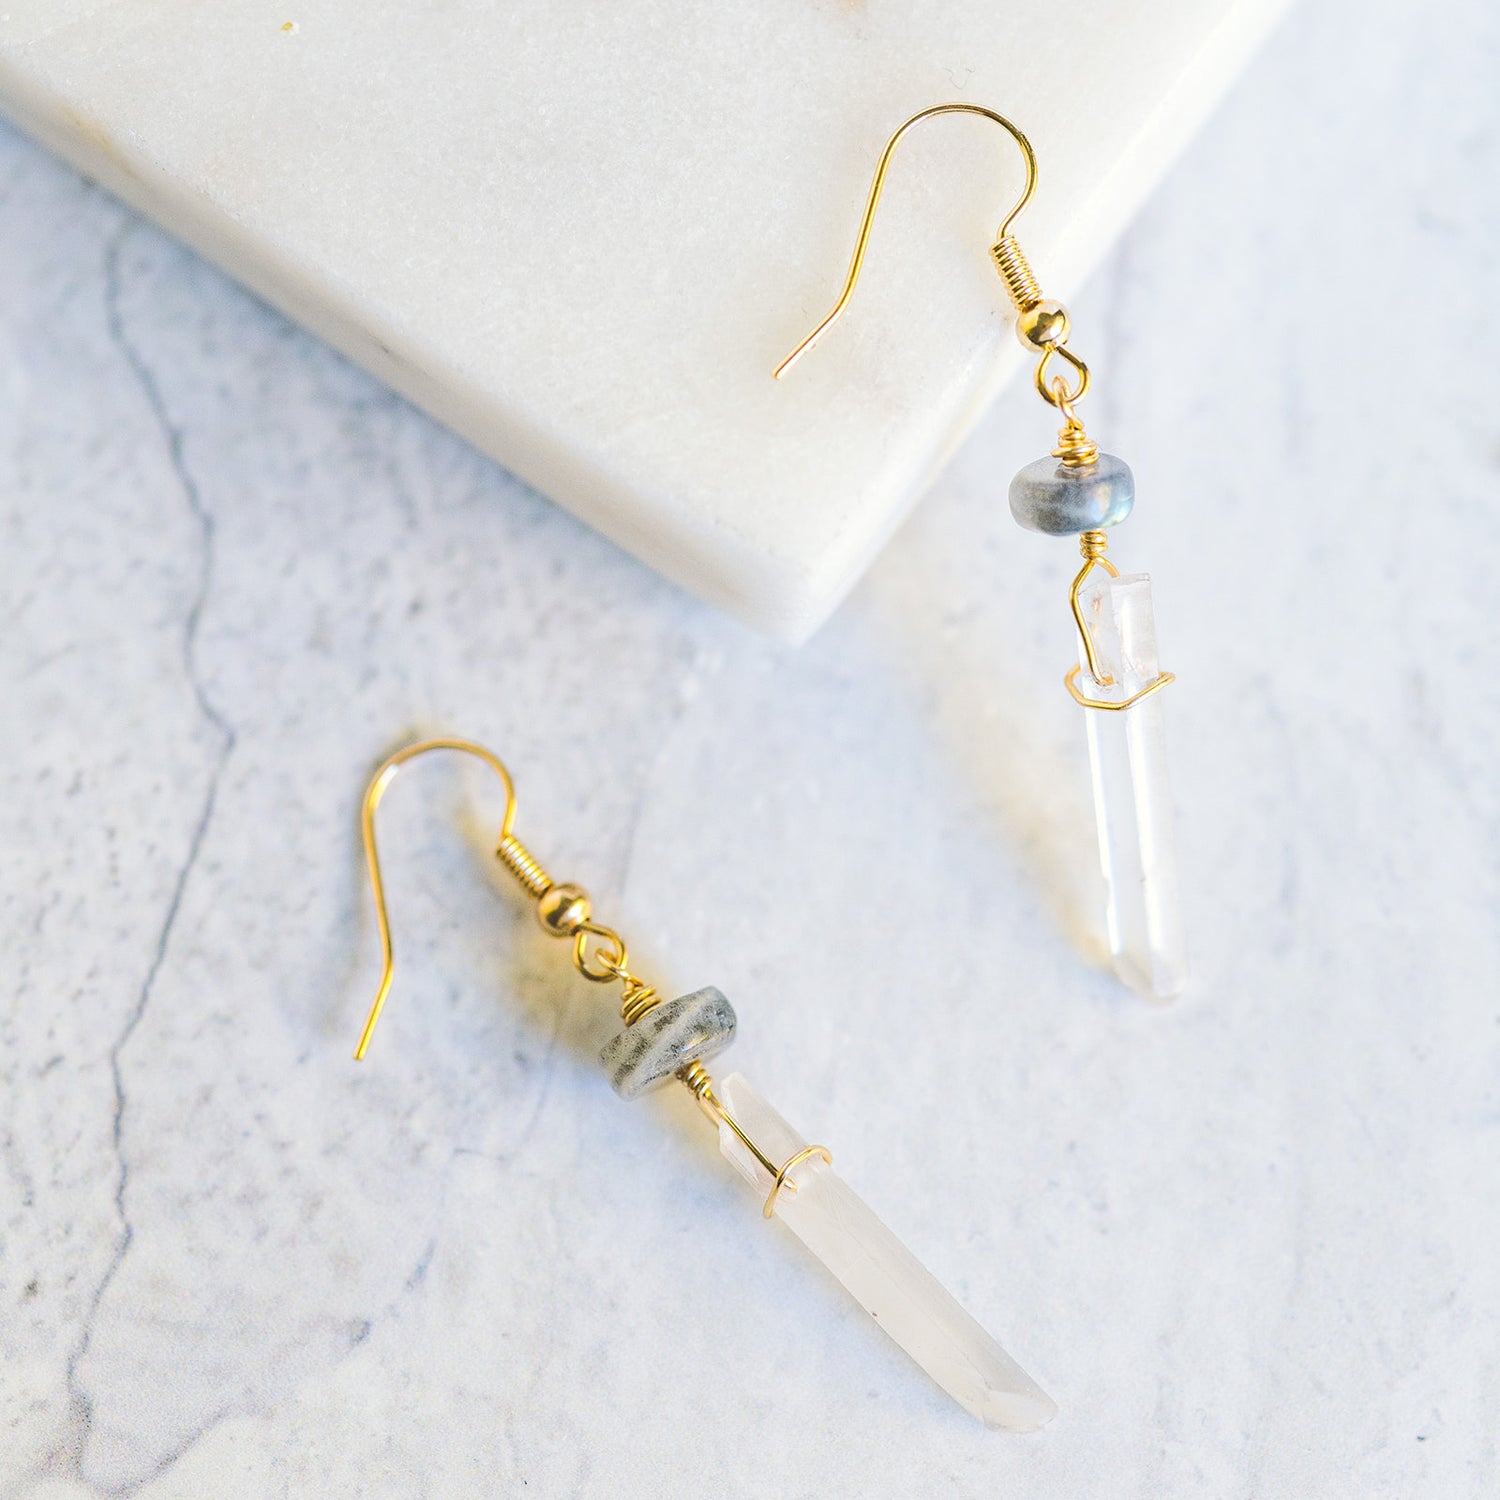 Wire Wrapped Crystal Earrings - Clear Quartz and Labradorite